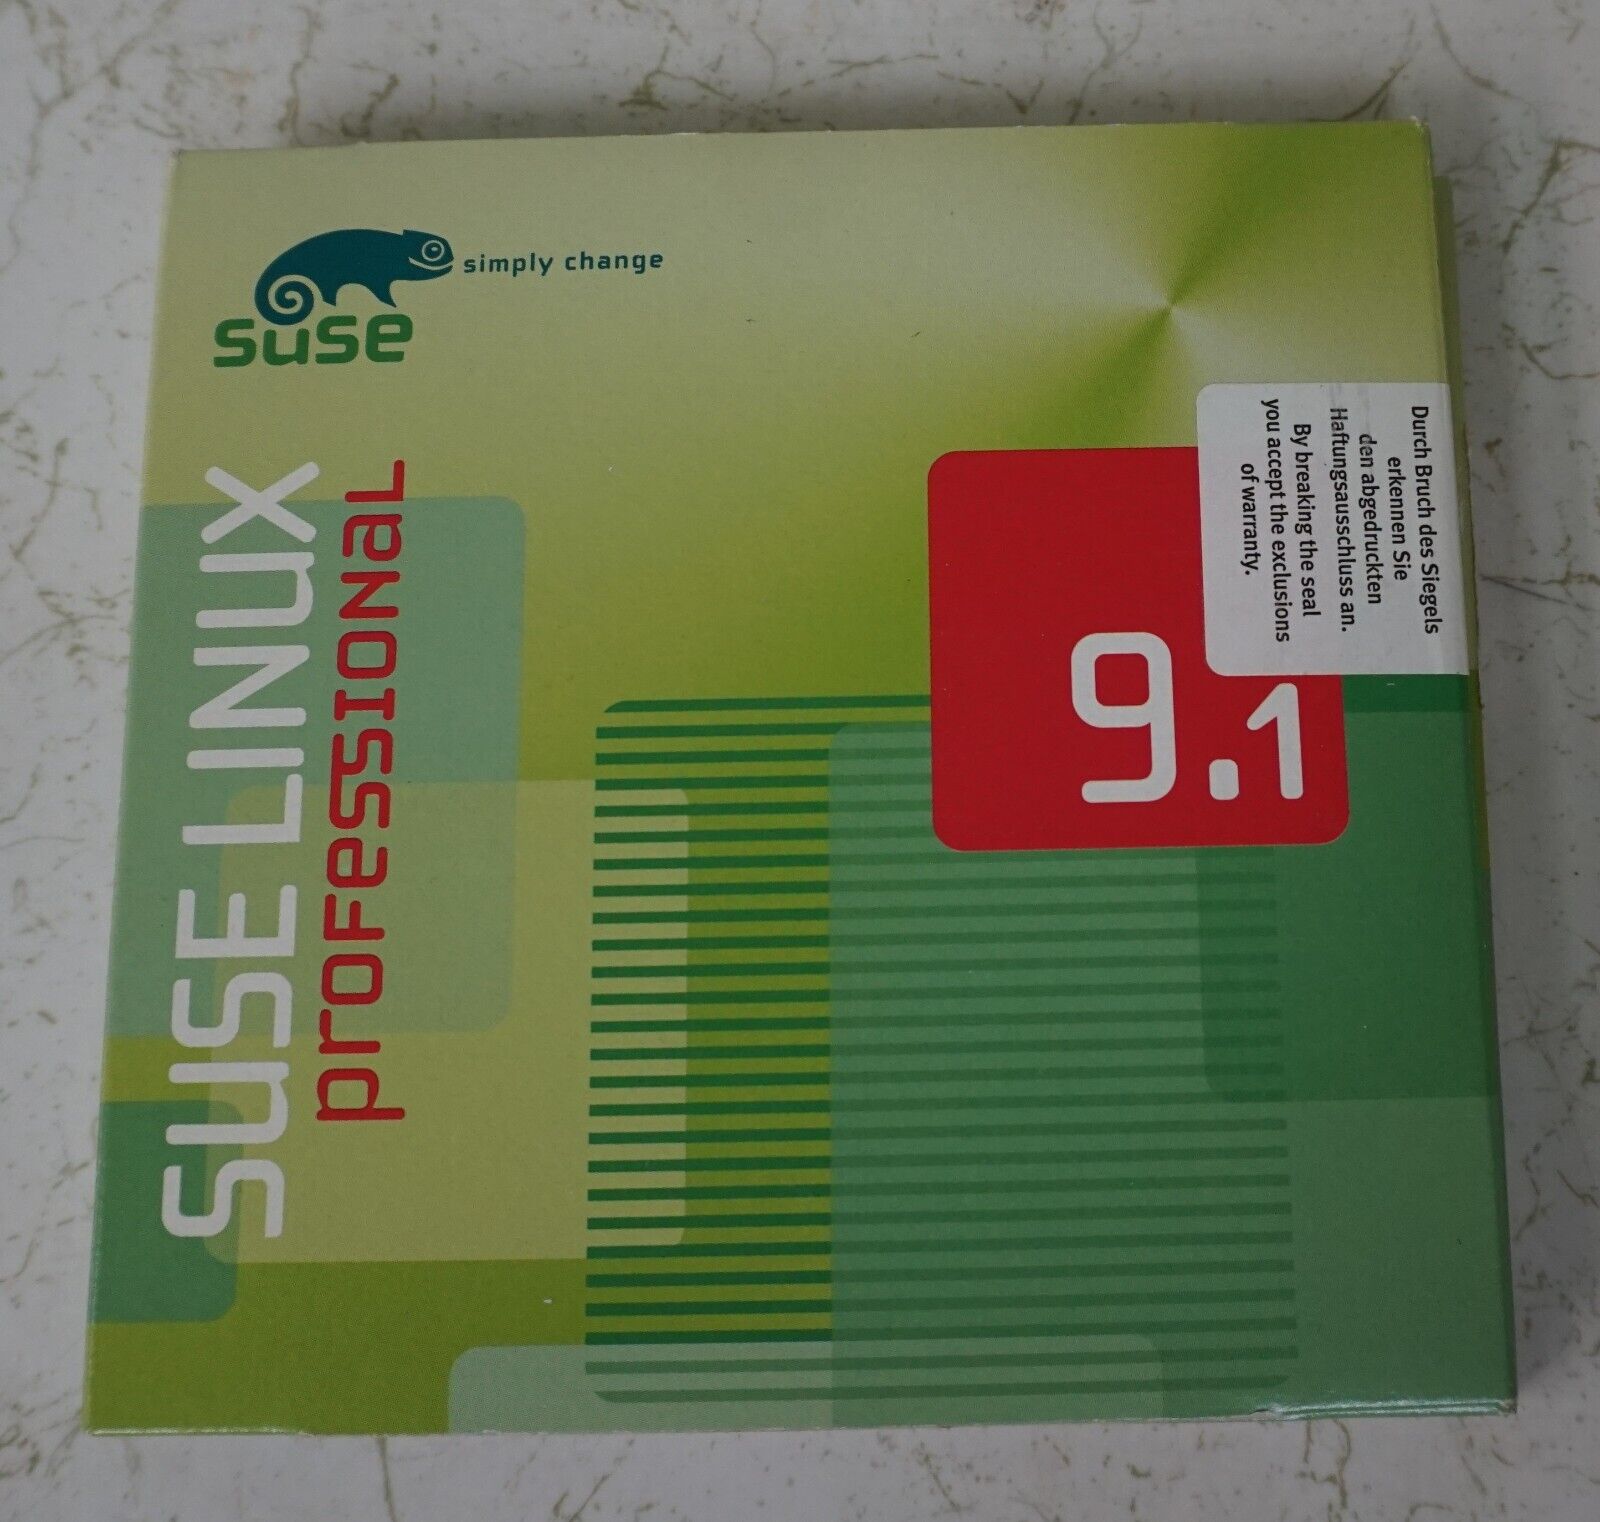 Novell SUSE LINUX Professional 9.1 Operating System Software